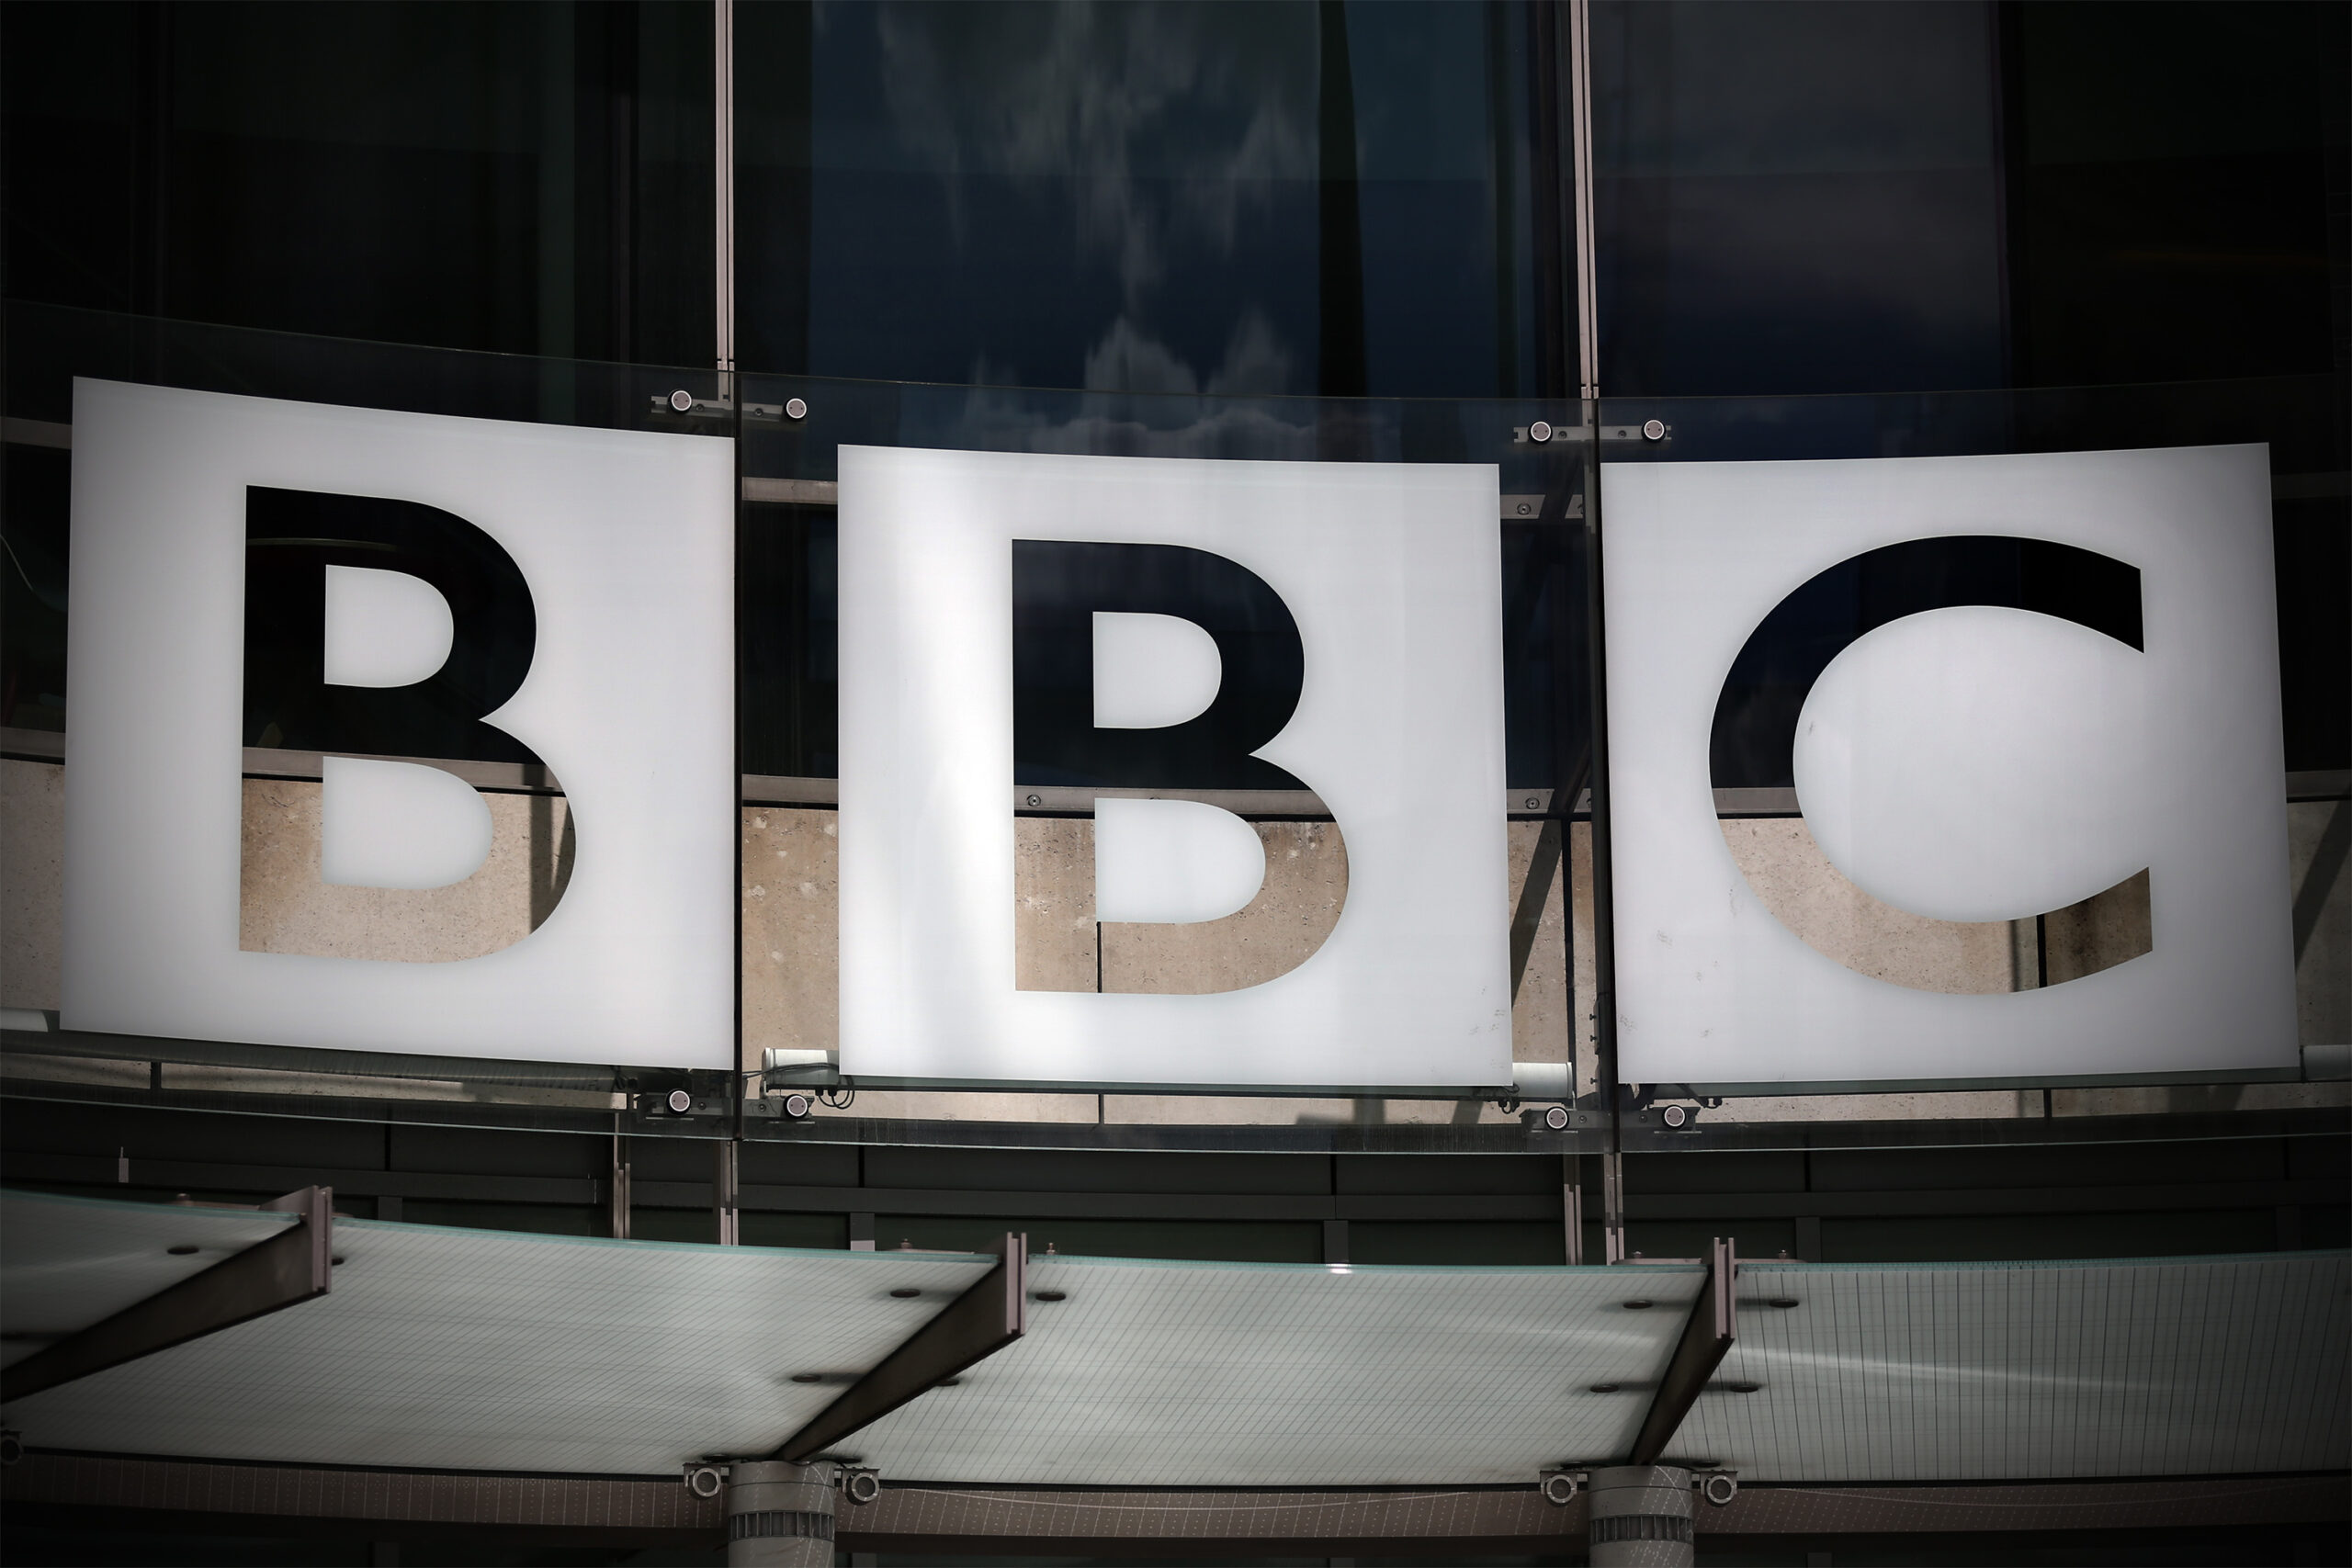 BBC, Voice of America Condemn Taliban Barring Their On-Air Programming in Afghanistan: ‘Reconsider This Troubling and Unfortunate Decision’